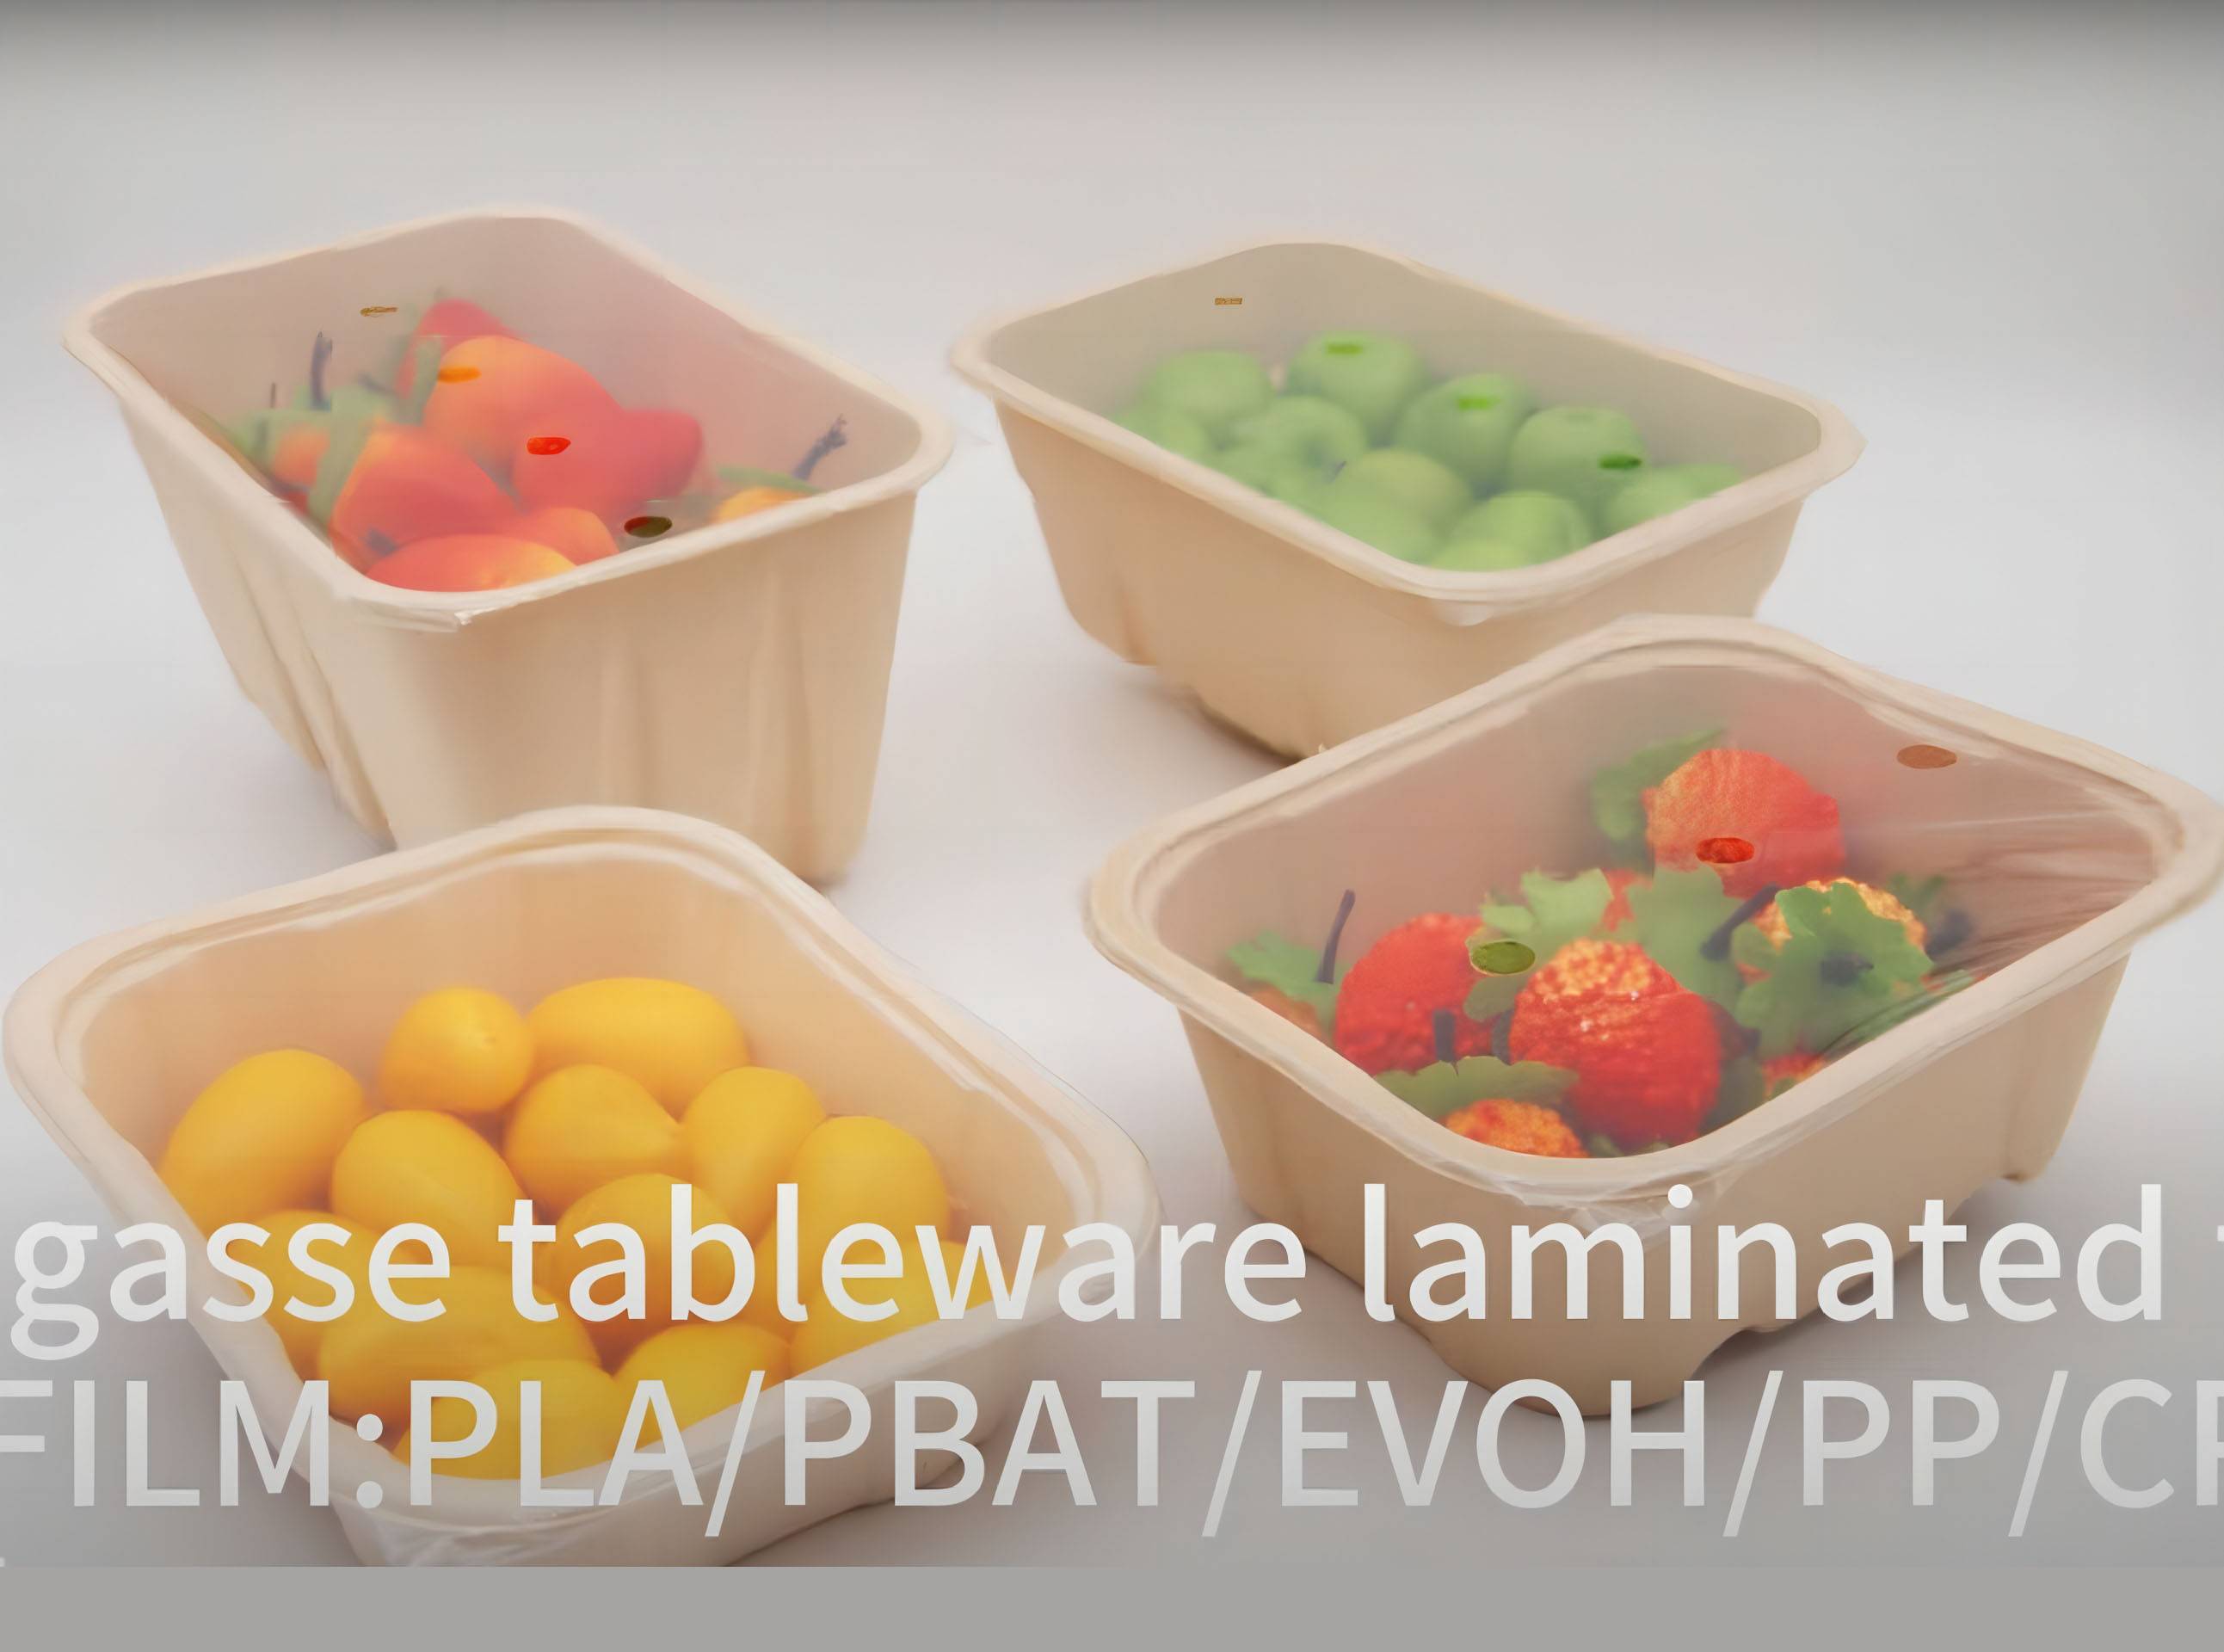 Sealable Meal Tray Biodegradable Bagasse Tray with Lamination Film